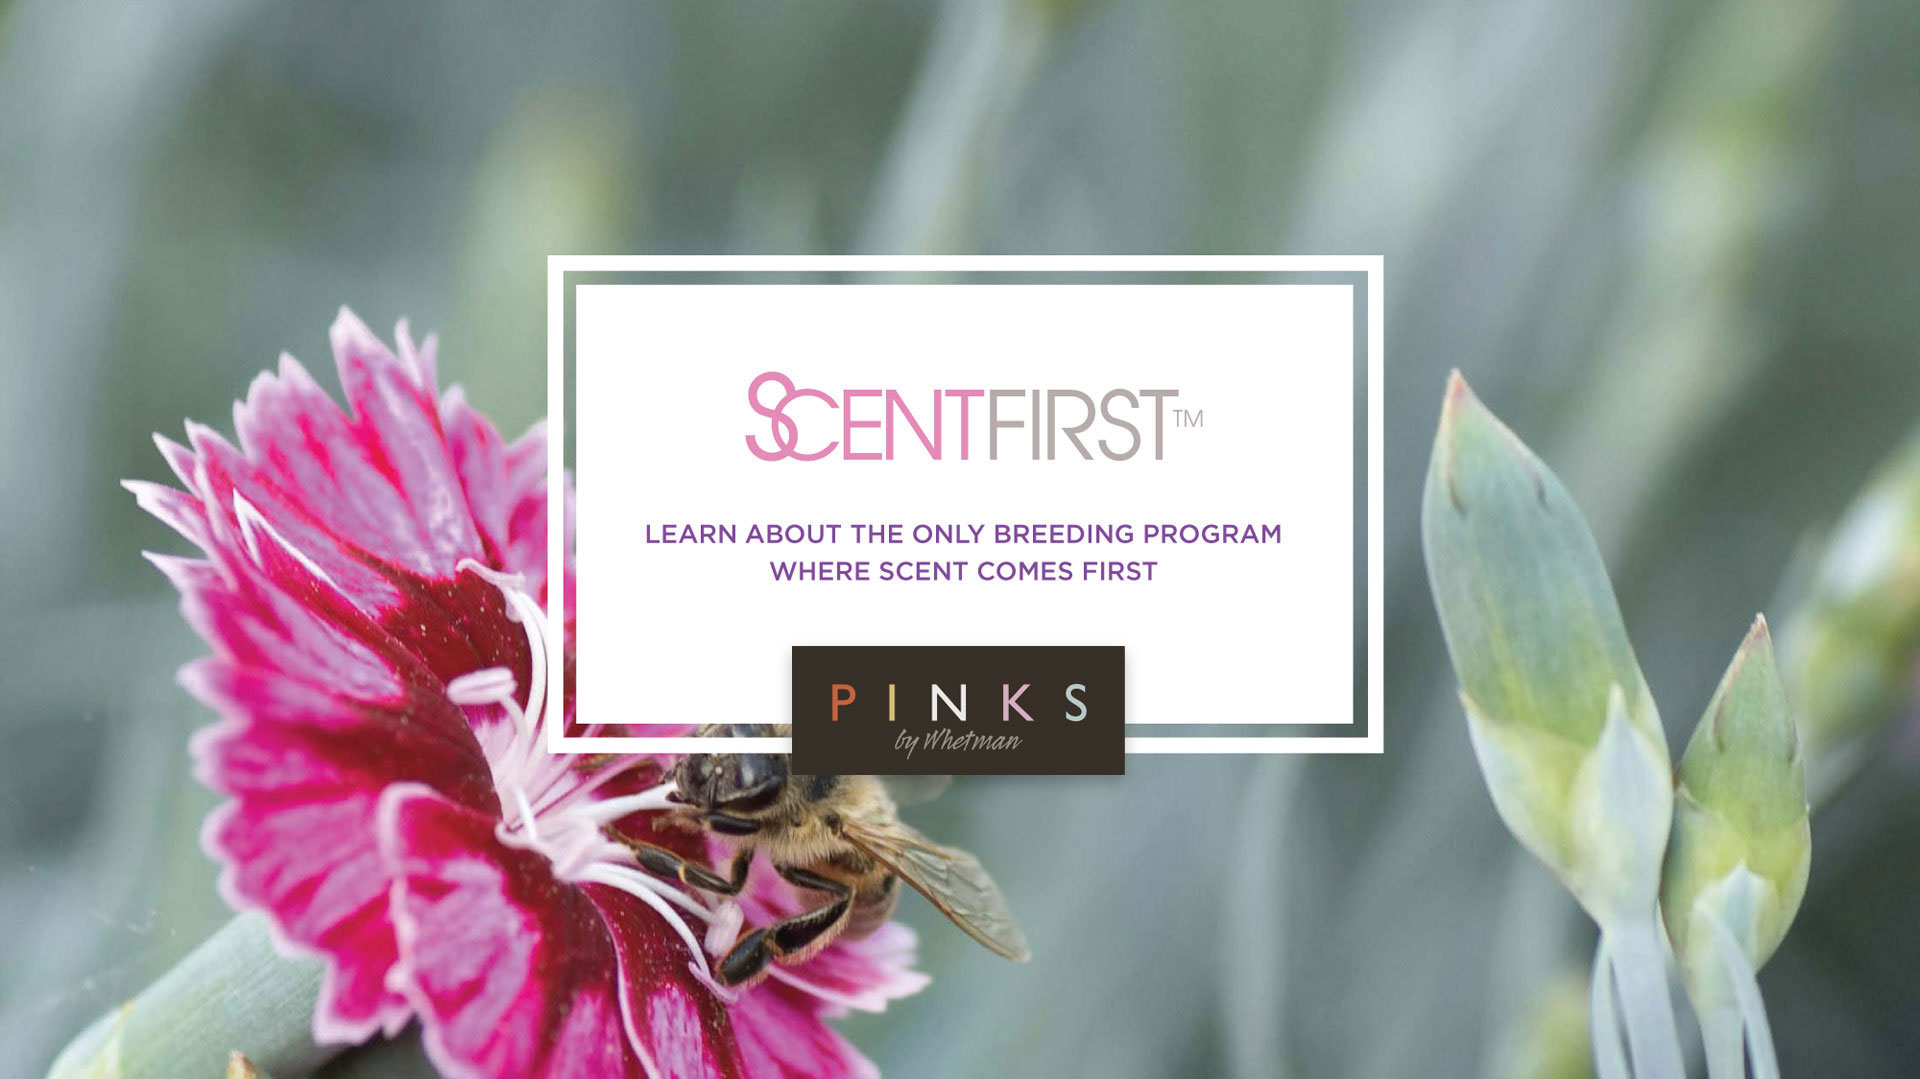 ScentFirst Dianthus selections from Whetman Pinks USA